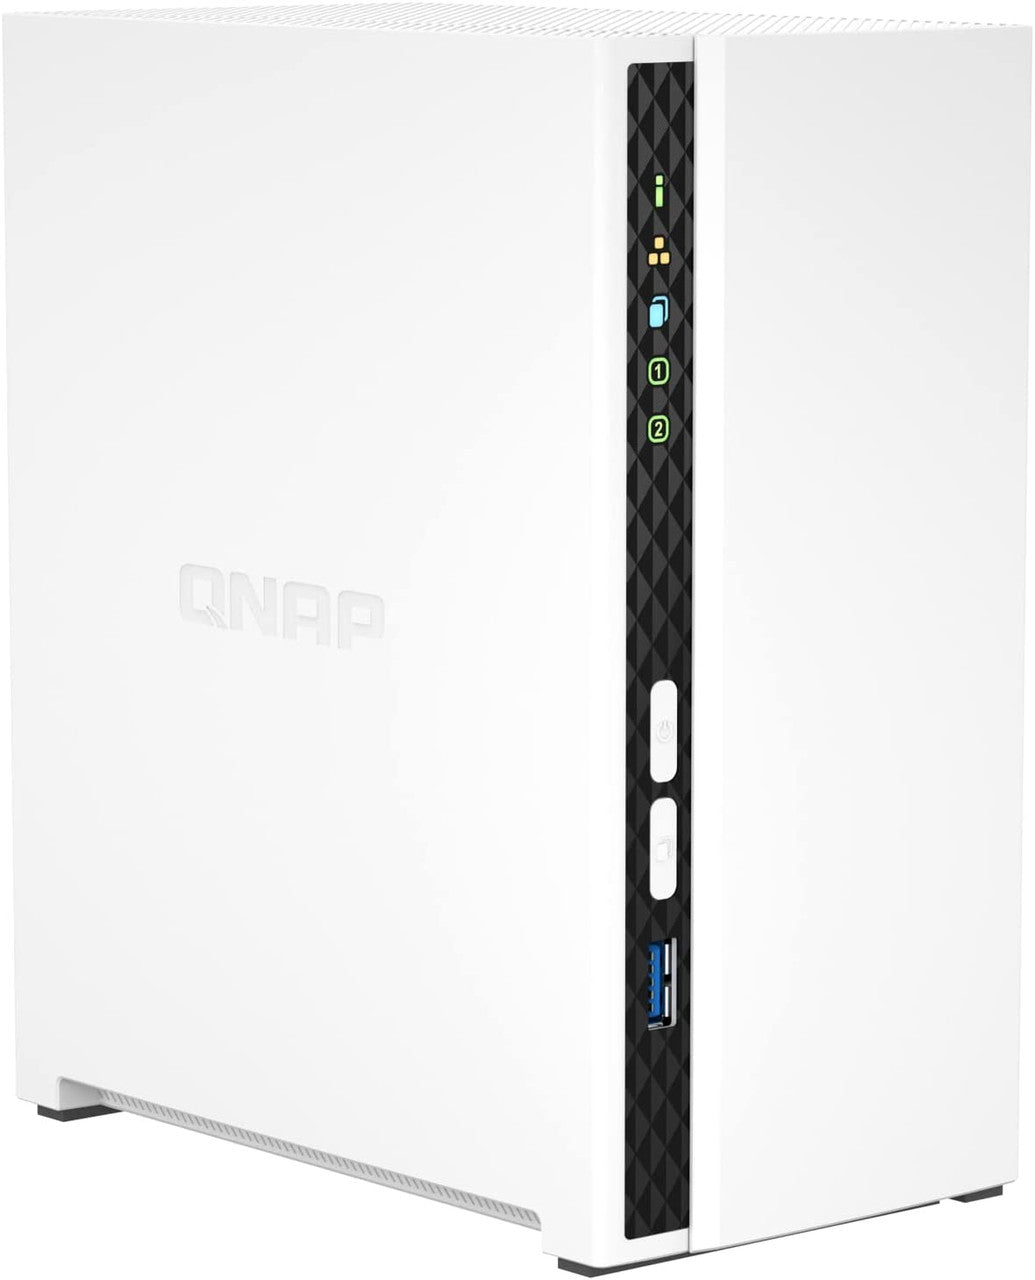 QNAP TS-233 2-Bay Desktop NAS with a 4TB (2 x 2TB) of Western Digital Red Plus Drives Fully Assembled and Tested